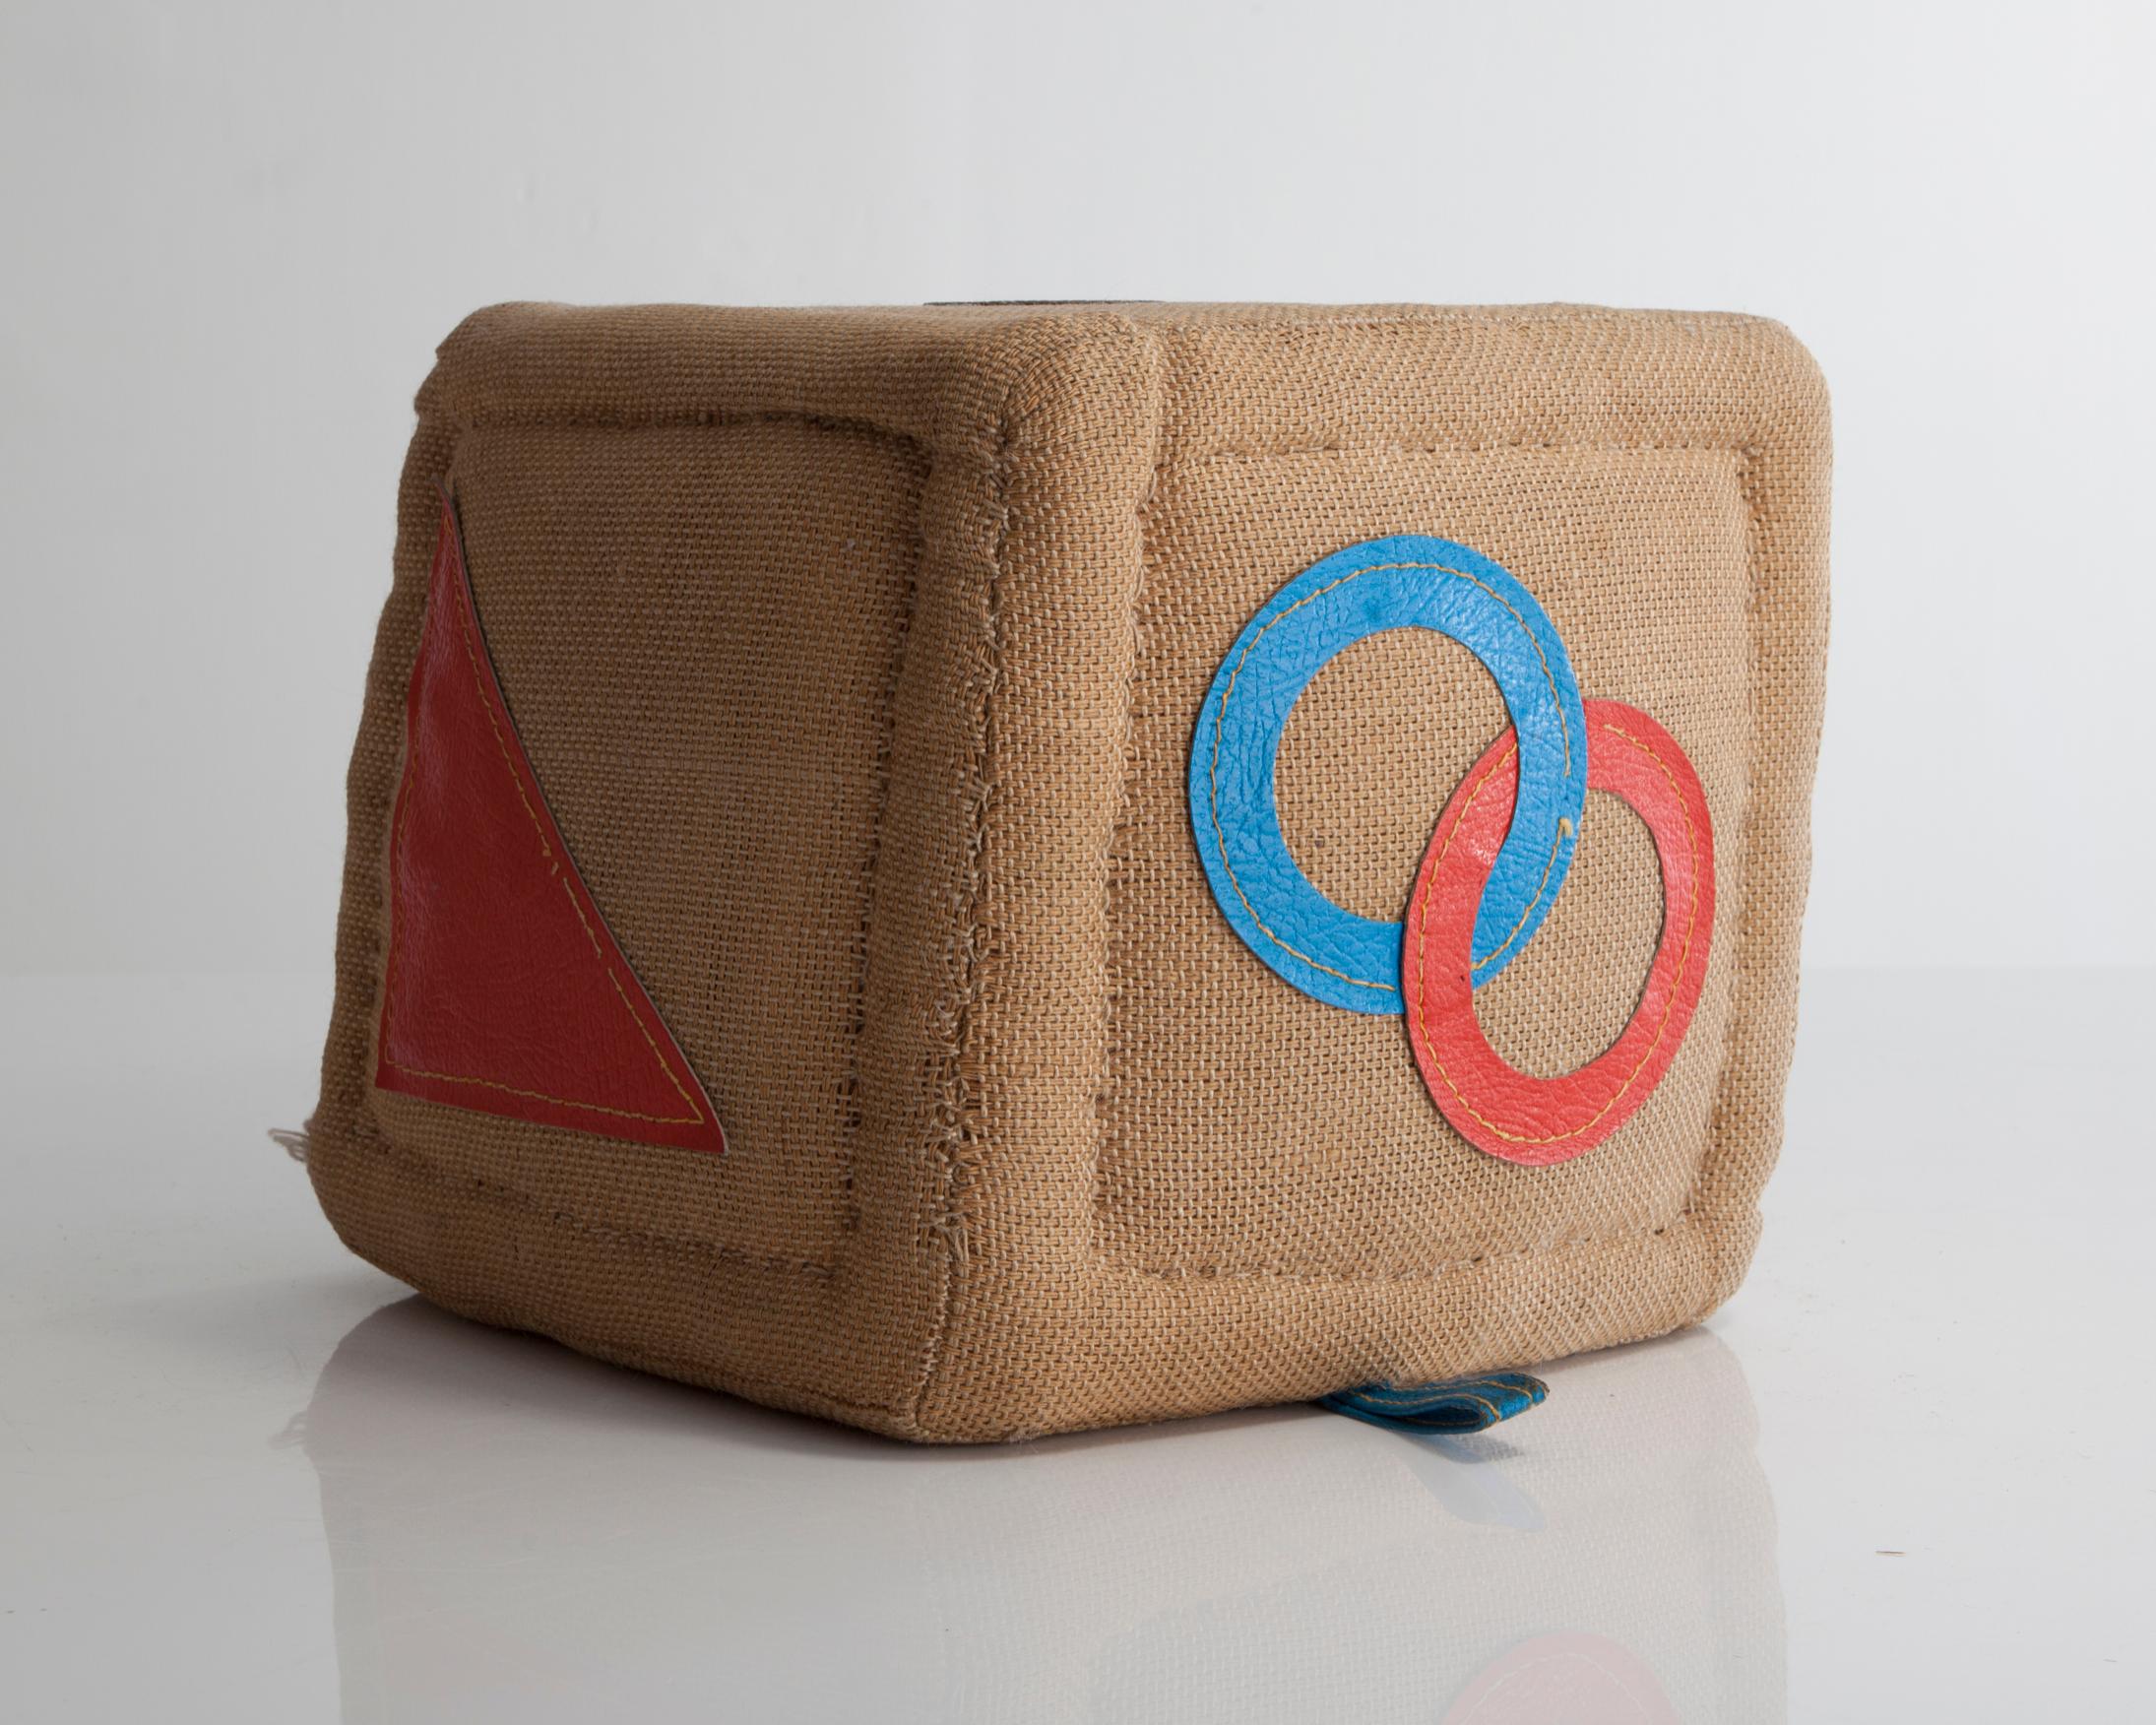 Therapeutic Toy cube in jute with leather detailing. Designed and made by Renate Müller for H. Josef Leven, Sonneberg, Germany, produced between 1968 and 1974.
 